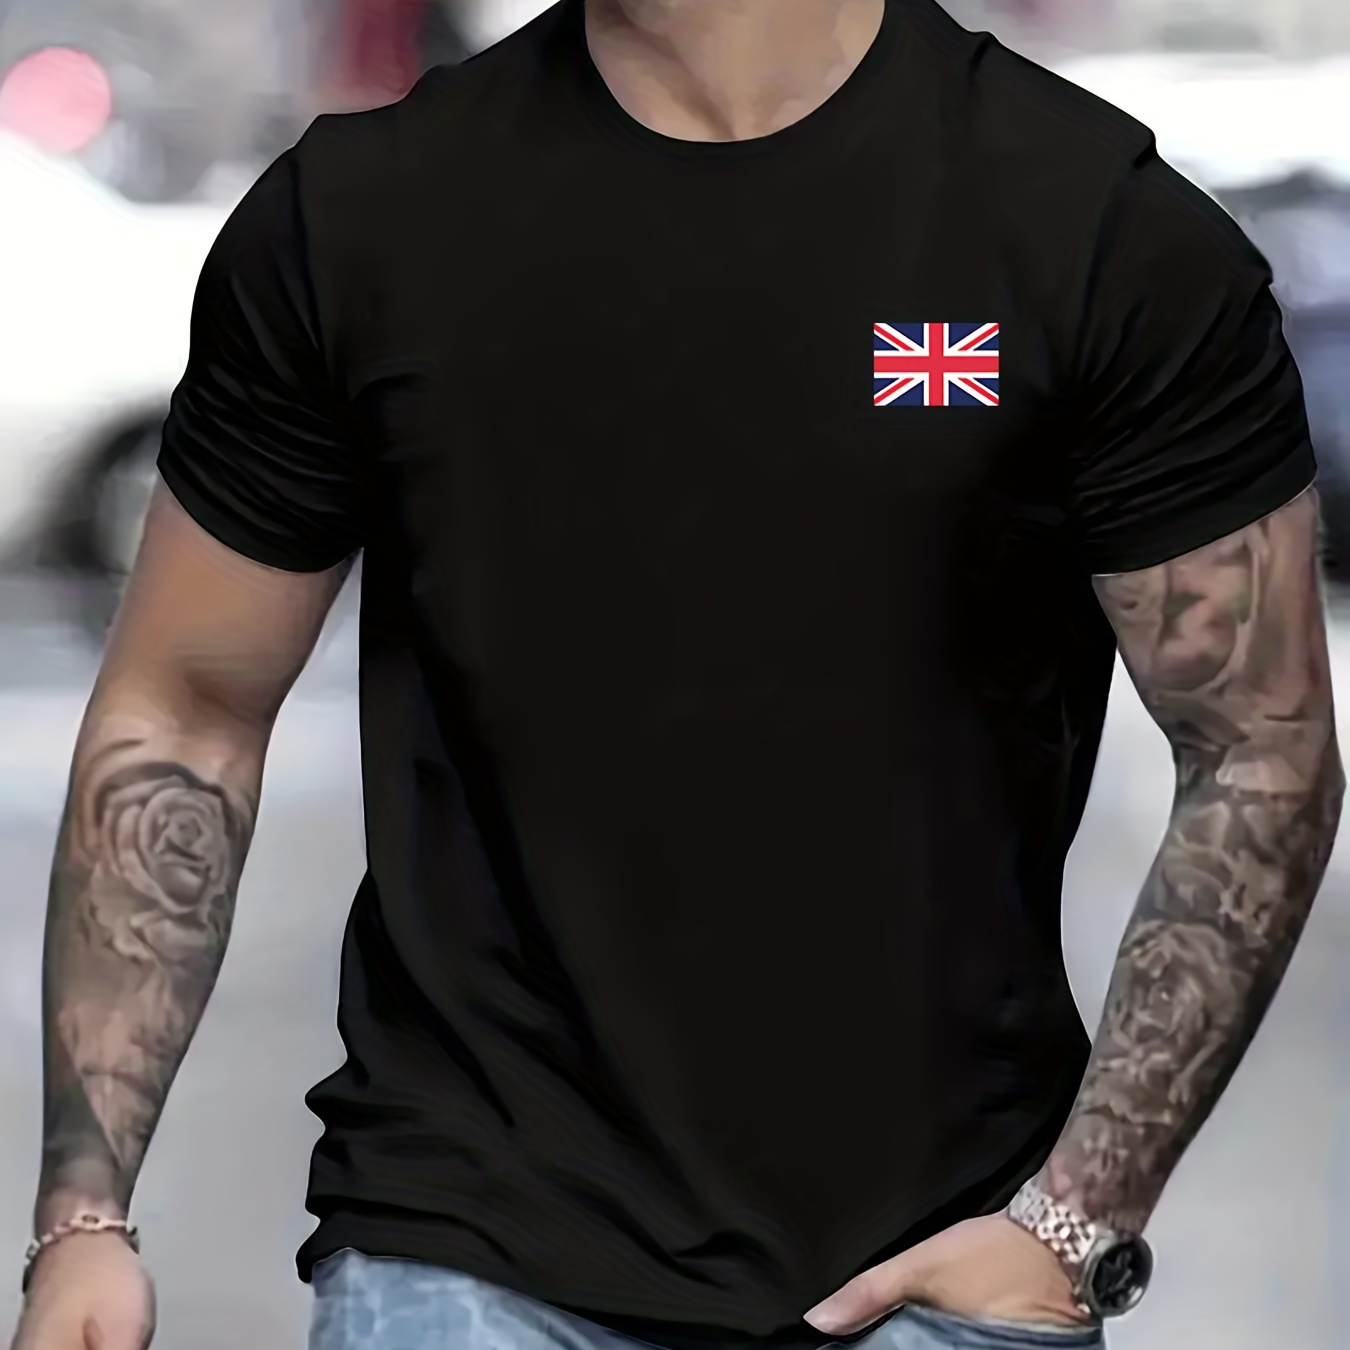 

The Union Jack Pattern Print Men's Comfy T-shirt, Graphic Tee Men's Summer Outdoor Clothes, Men's Clothing, Tops For Men